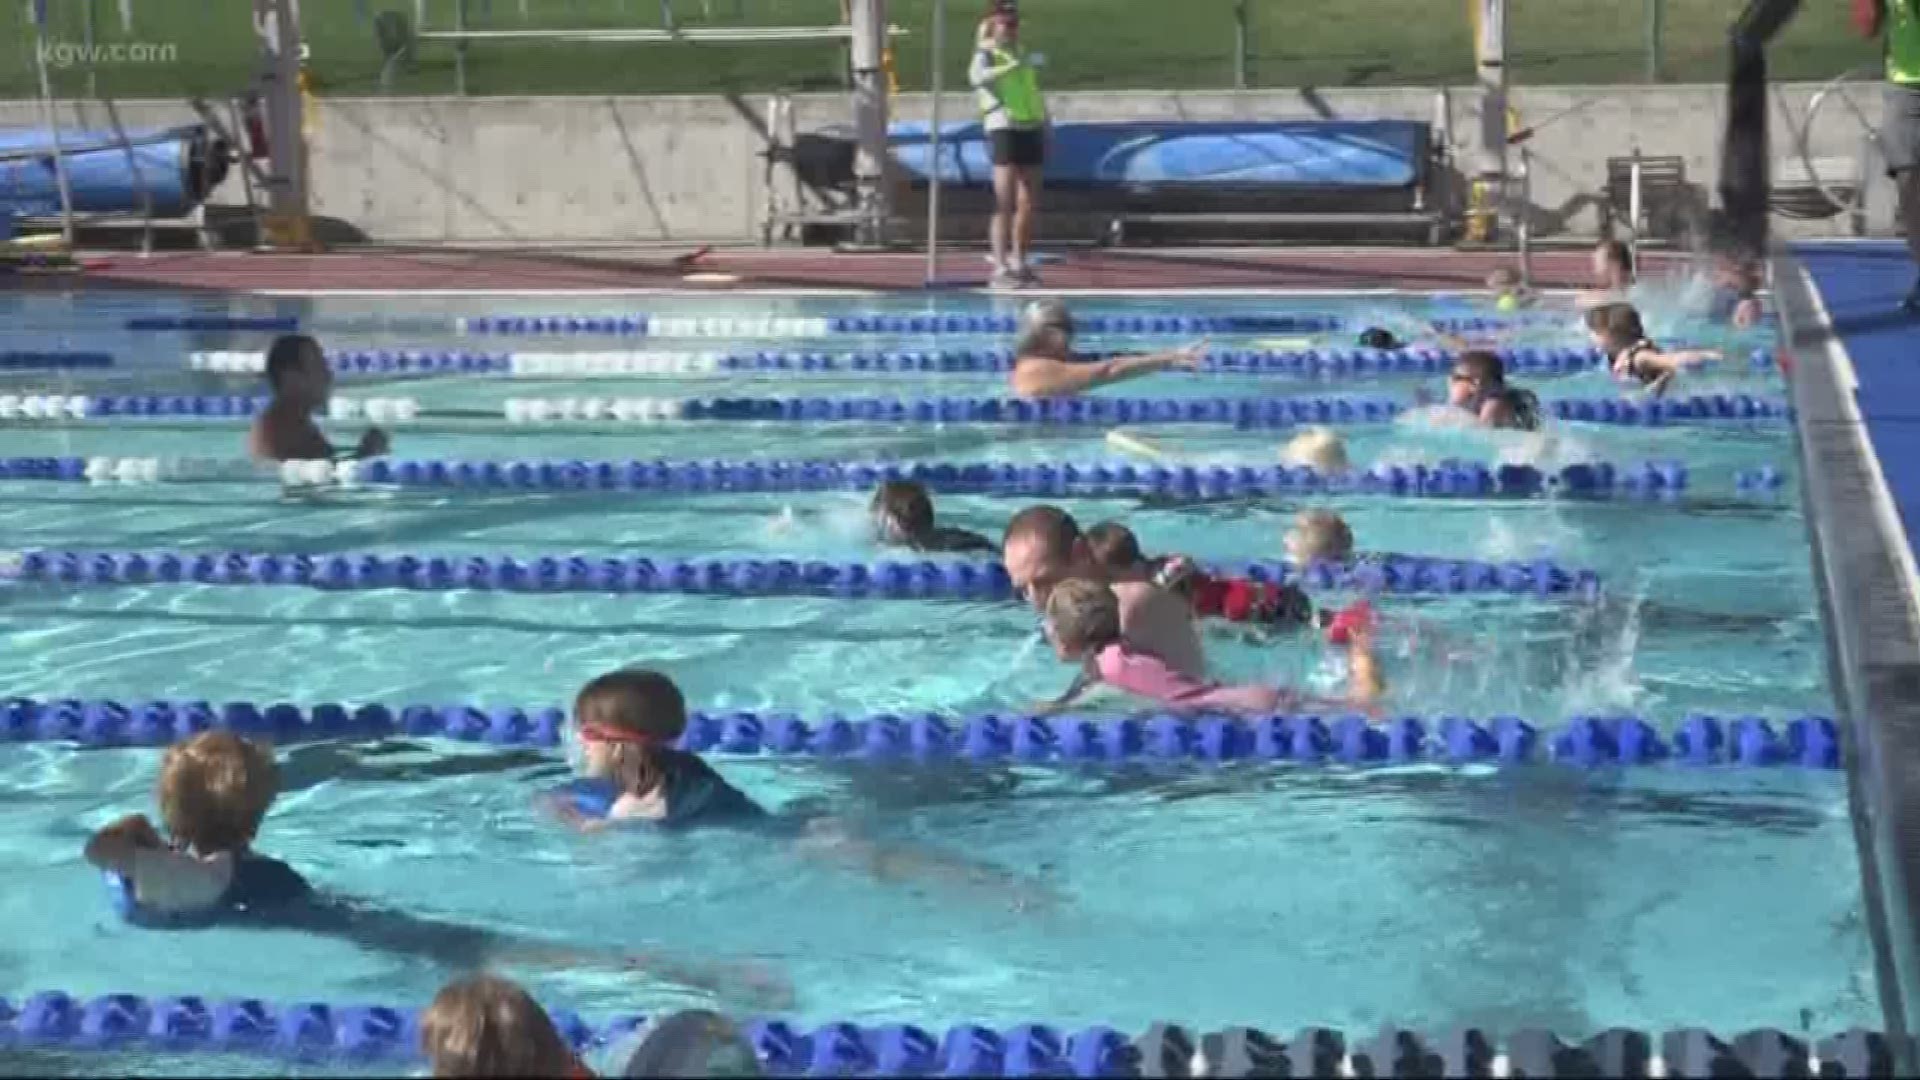 Children as young as age 4 participated in a triathlon in Bend that included a 25 yard swim, a third-mile bike trail and 400 yard run.